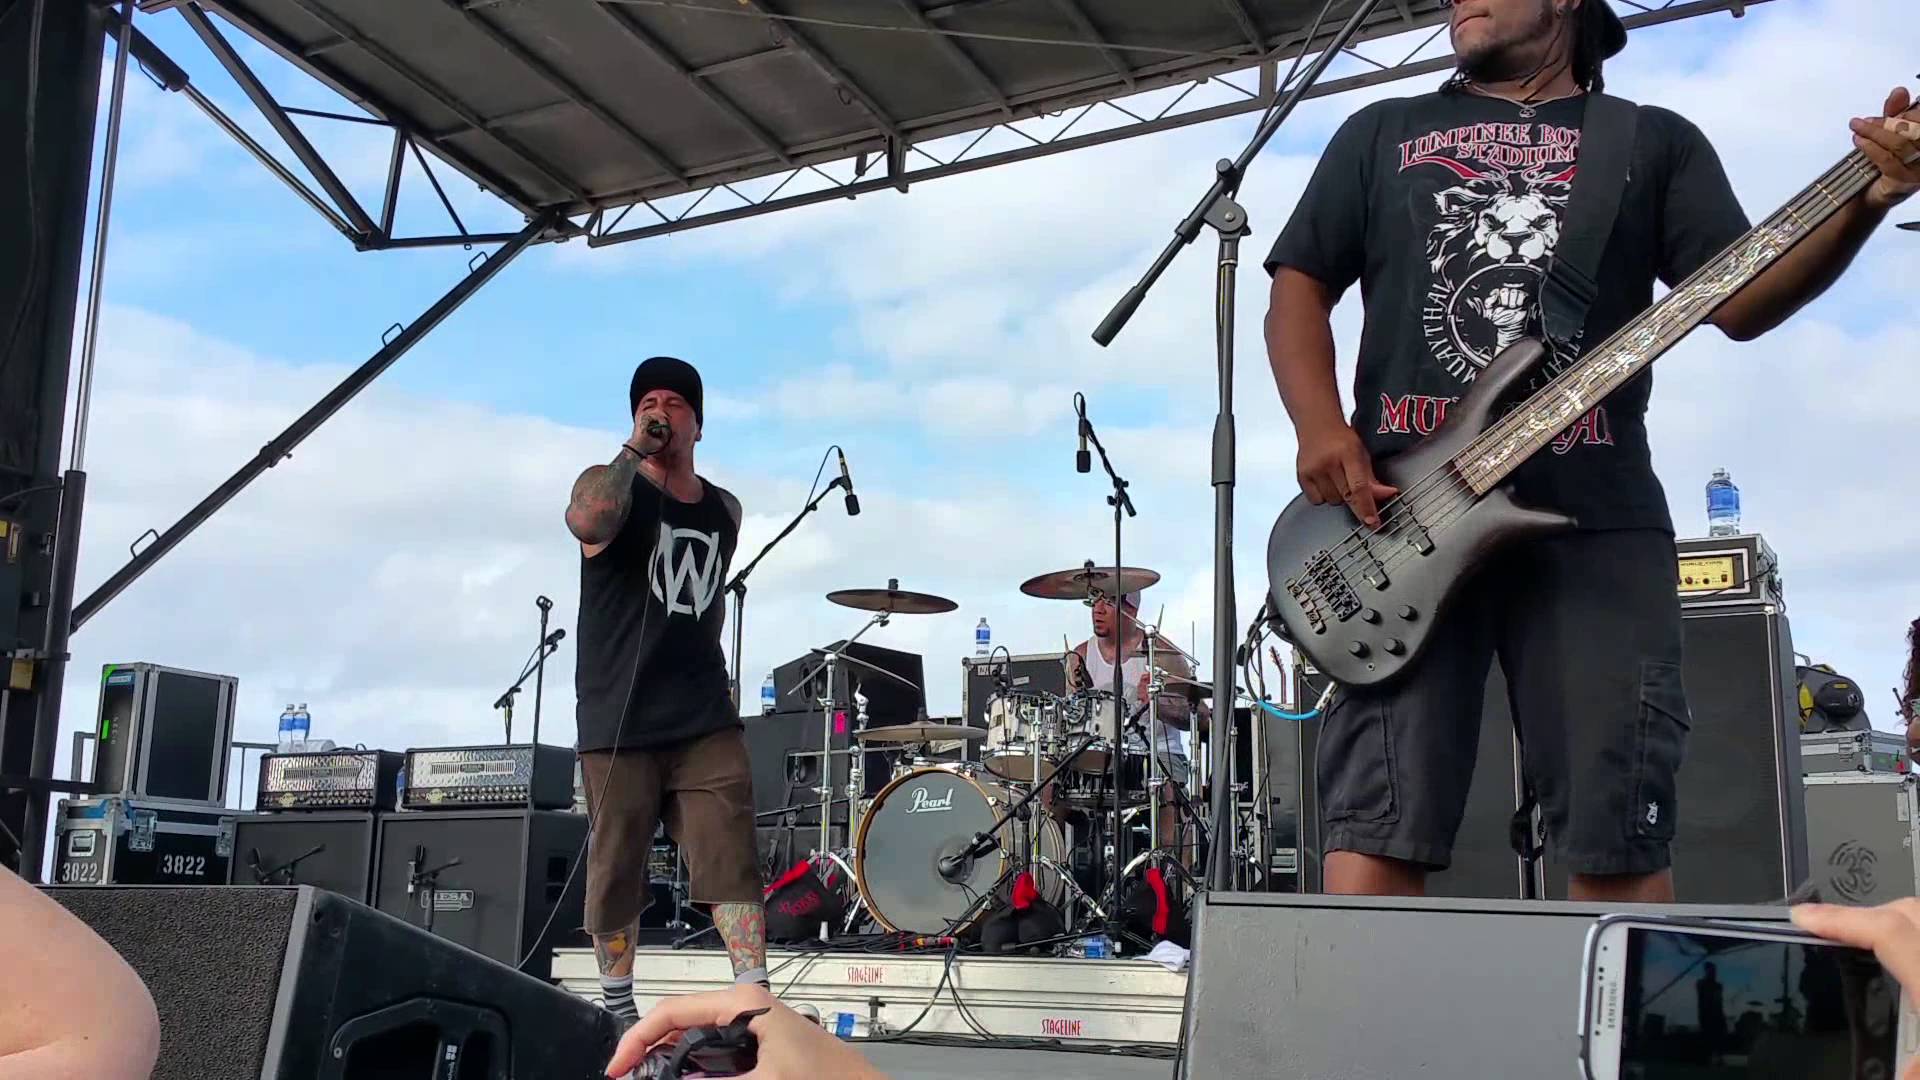 P.O.D. - Youth of a Nation (Live at Shiprocked 2015)